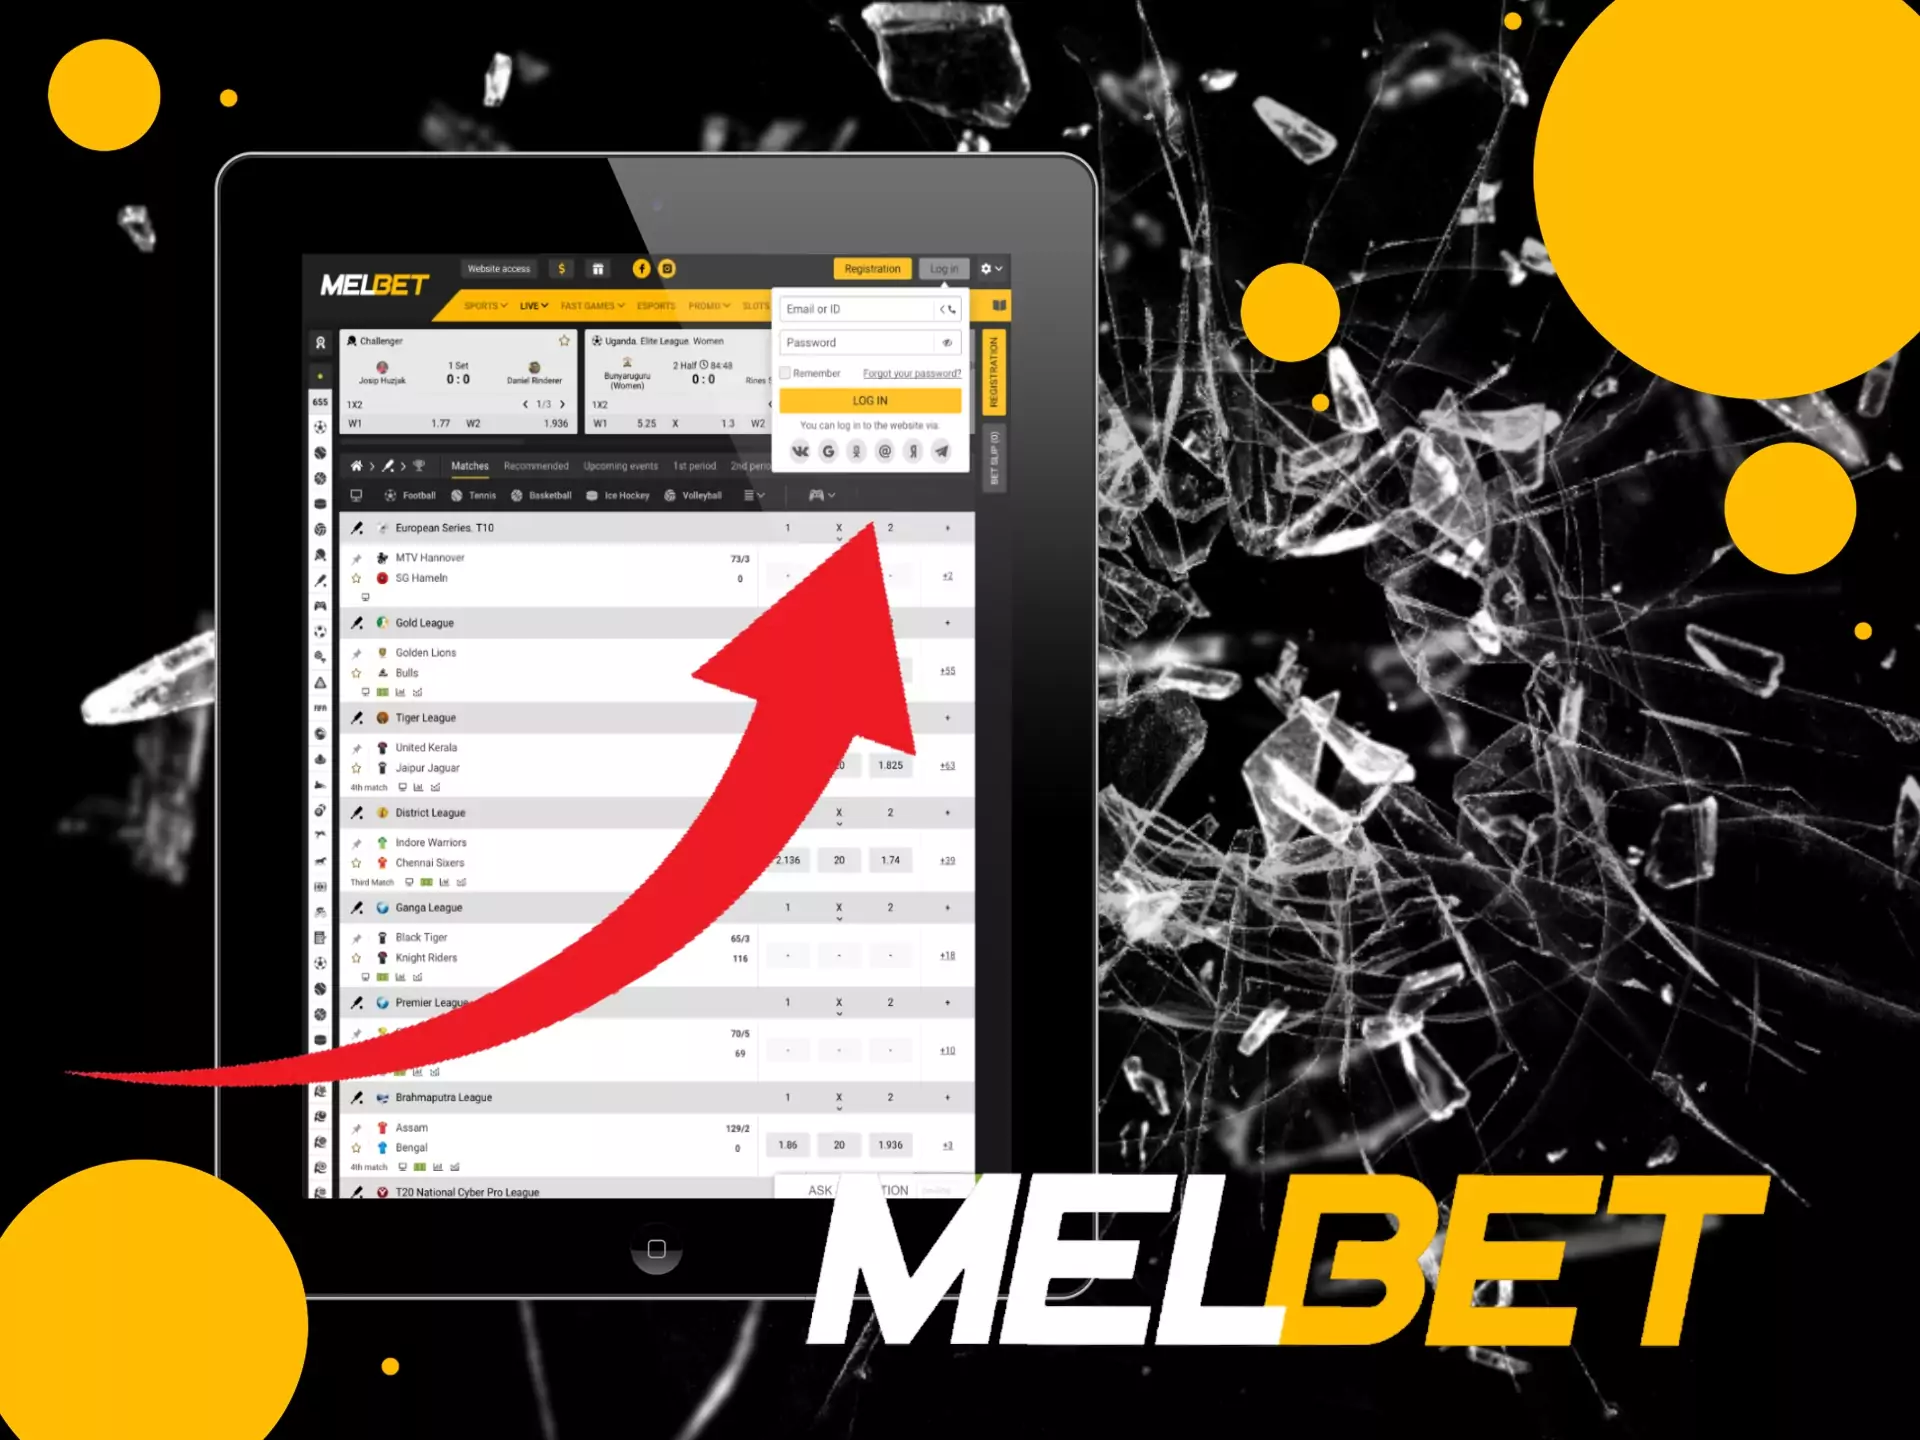 After logging in you will ba able to make your first deposit and start betting.